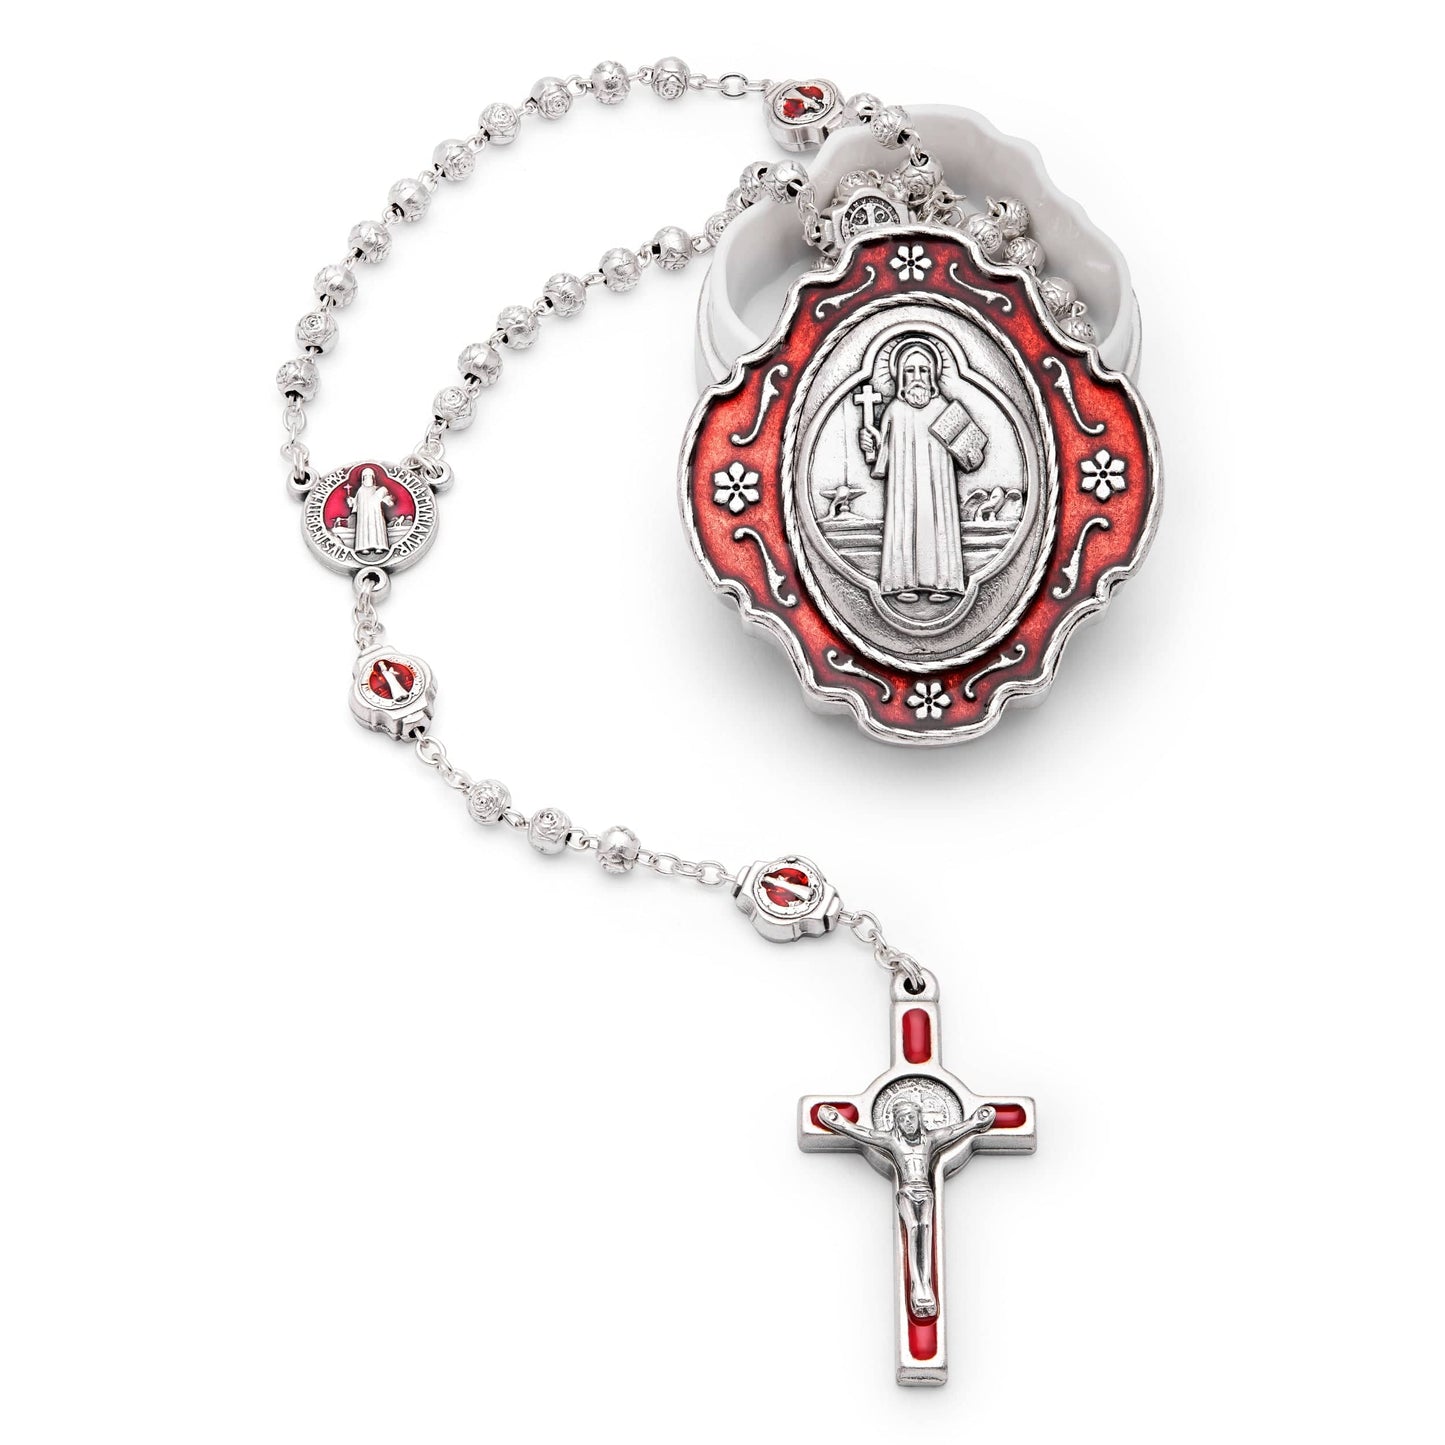 MONDO CATTOLICO Prayer Beads 36 cm (14.17 in) / 4 mm (0.15 in) Saint Benedict Rosary with  Enamel Pewter Box